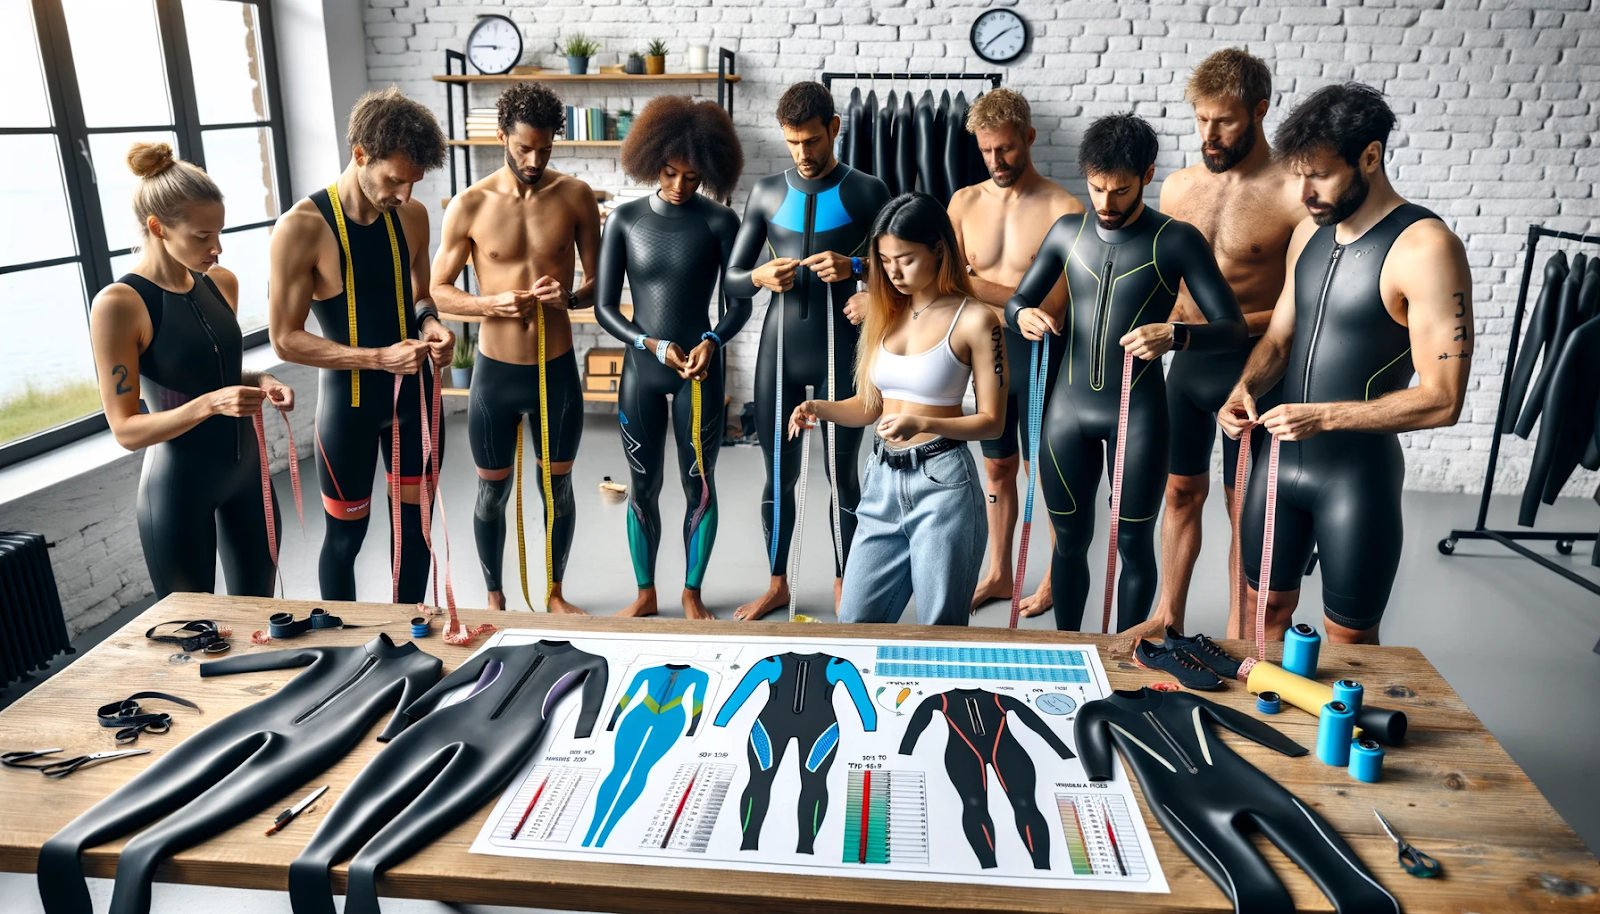 Photo of a diverse group of triathletes standing together, discussing wetsuits. Some are holding measuring tapes around their arms and waist, while others are examining the neoprene material of different wetsuits. Thermometers and water temperature charts can be seen in the background. A few athletes are seen checking the thickness of the wetsuits, while another points at a map showing various race locations and their respective water temperatures.